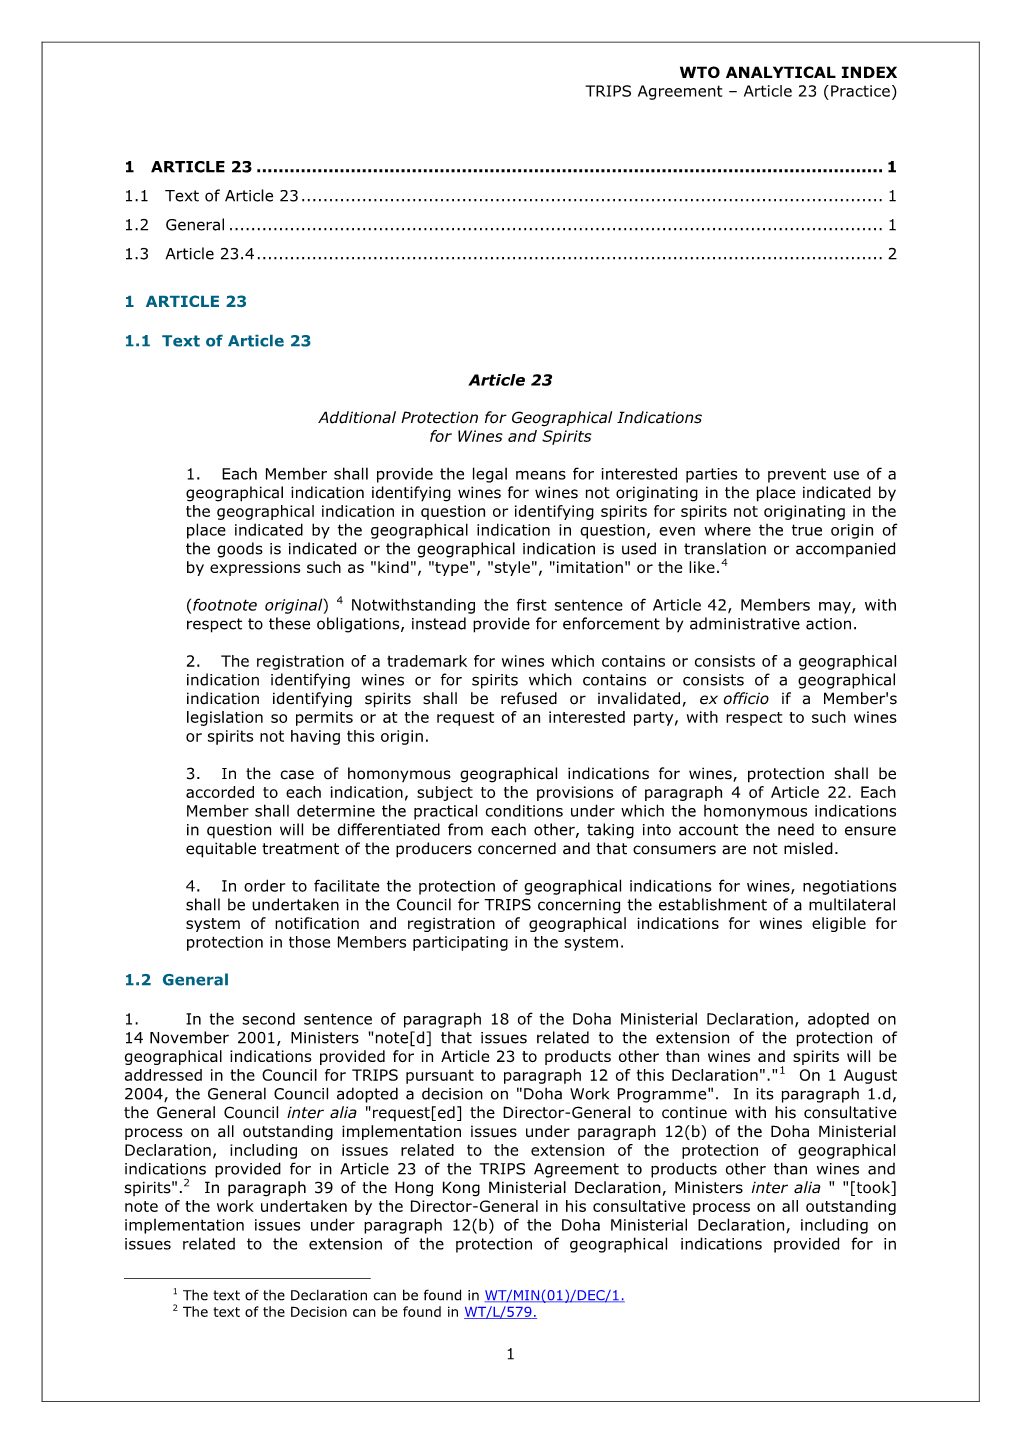 WTO ANALYTICAL INDEX TRIPS Agreement – Article 23 (Practice)